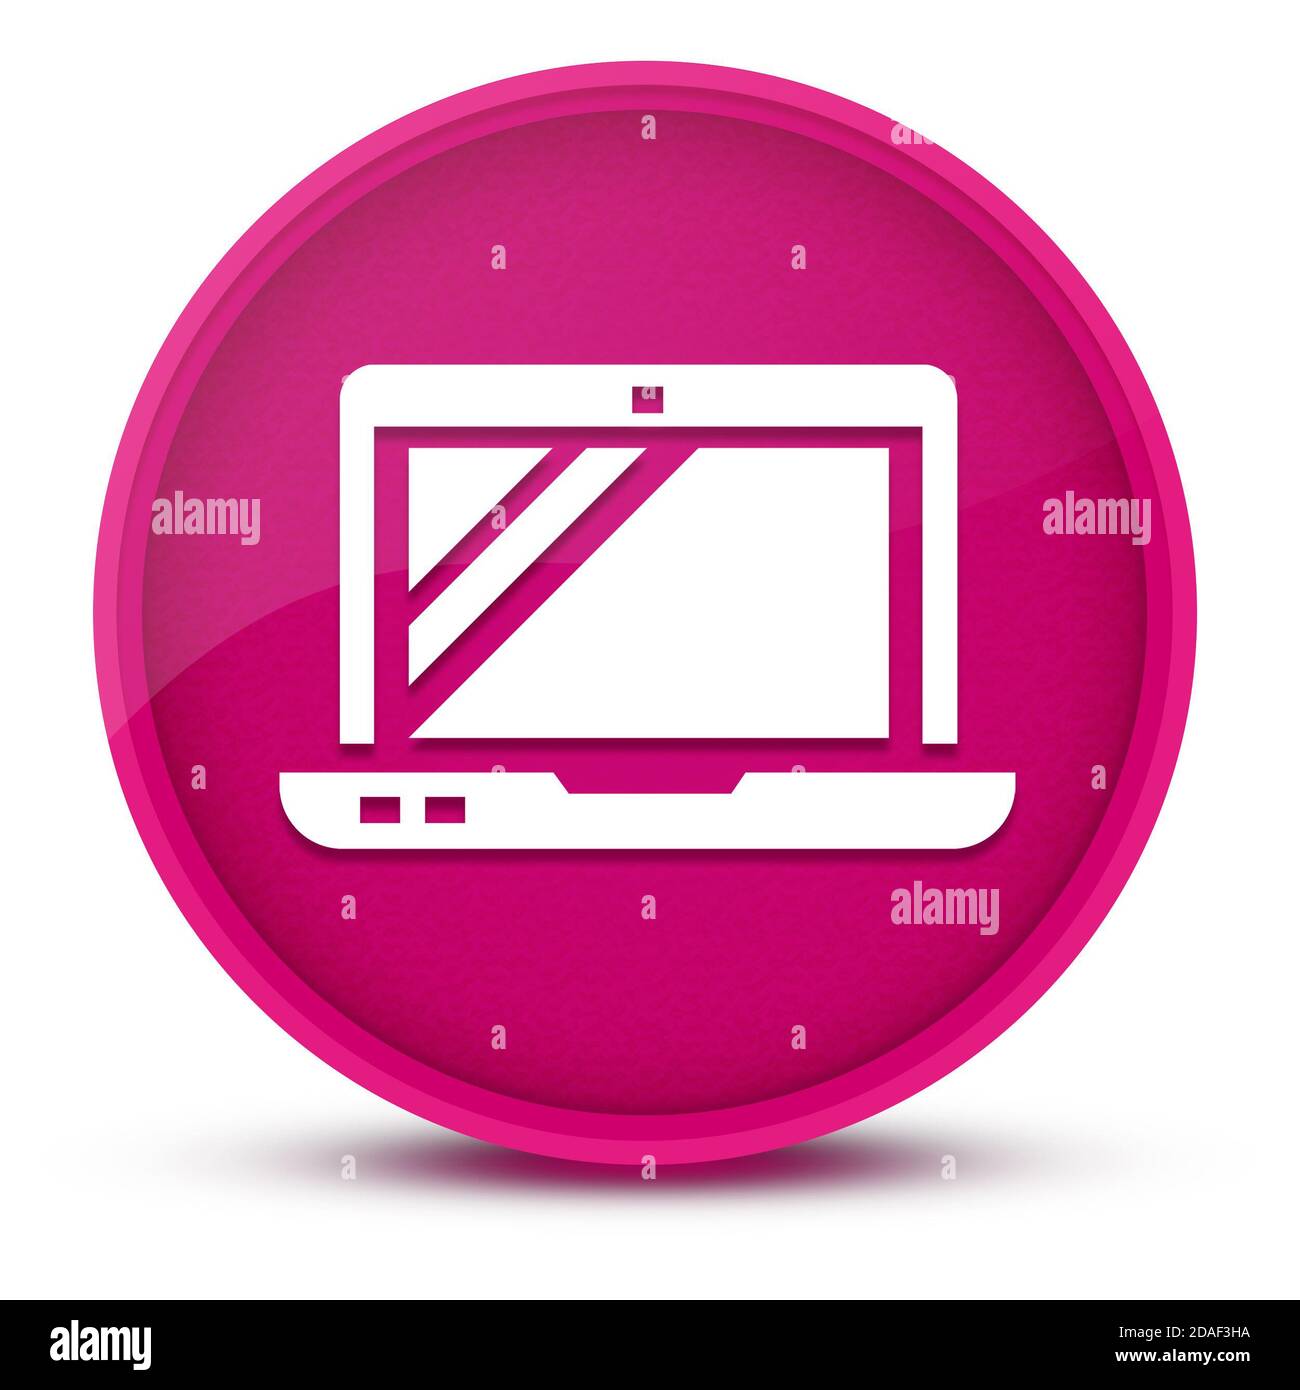 Technical skill luxurious glossy pink round button abstract illustration Stock Photo